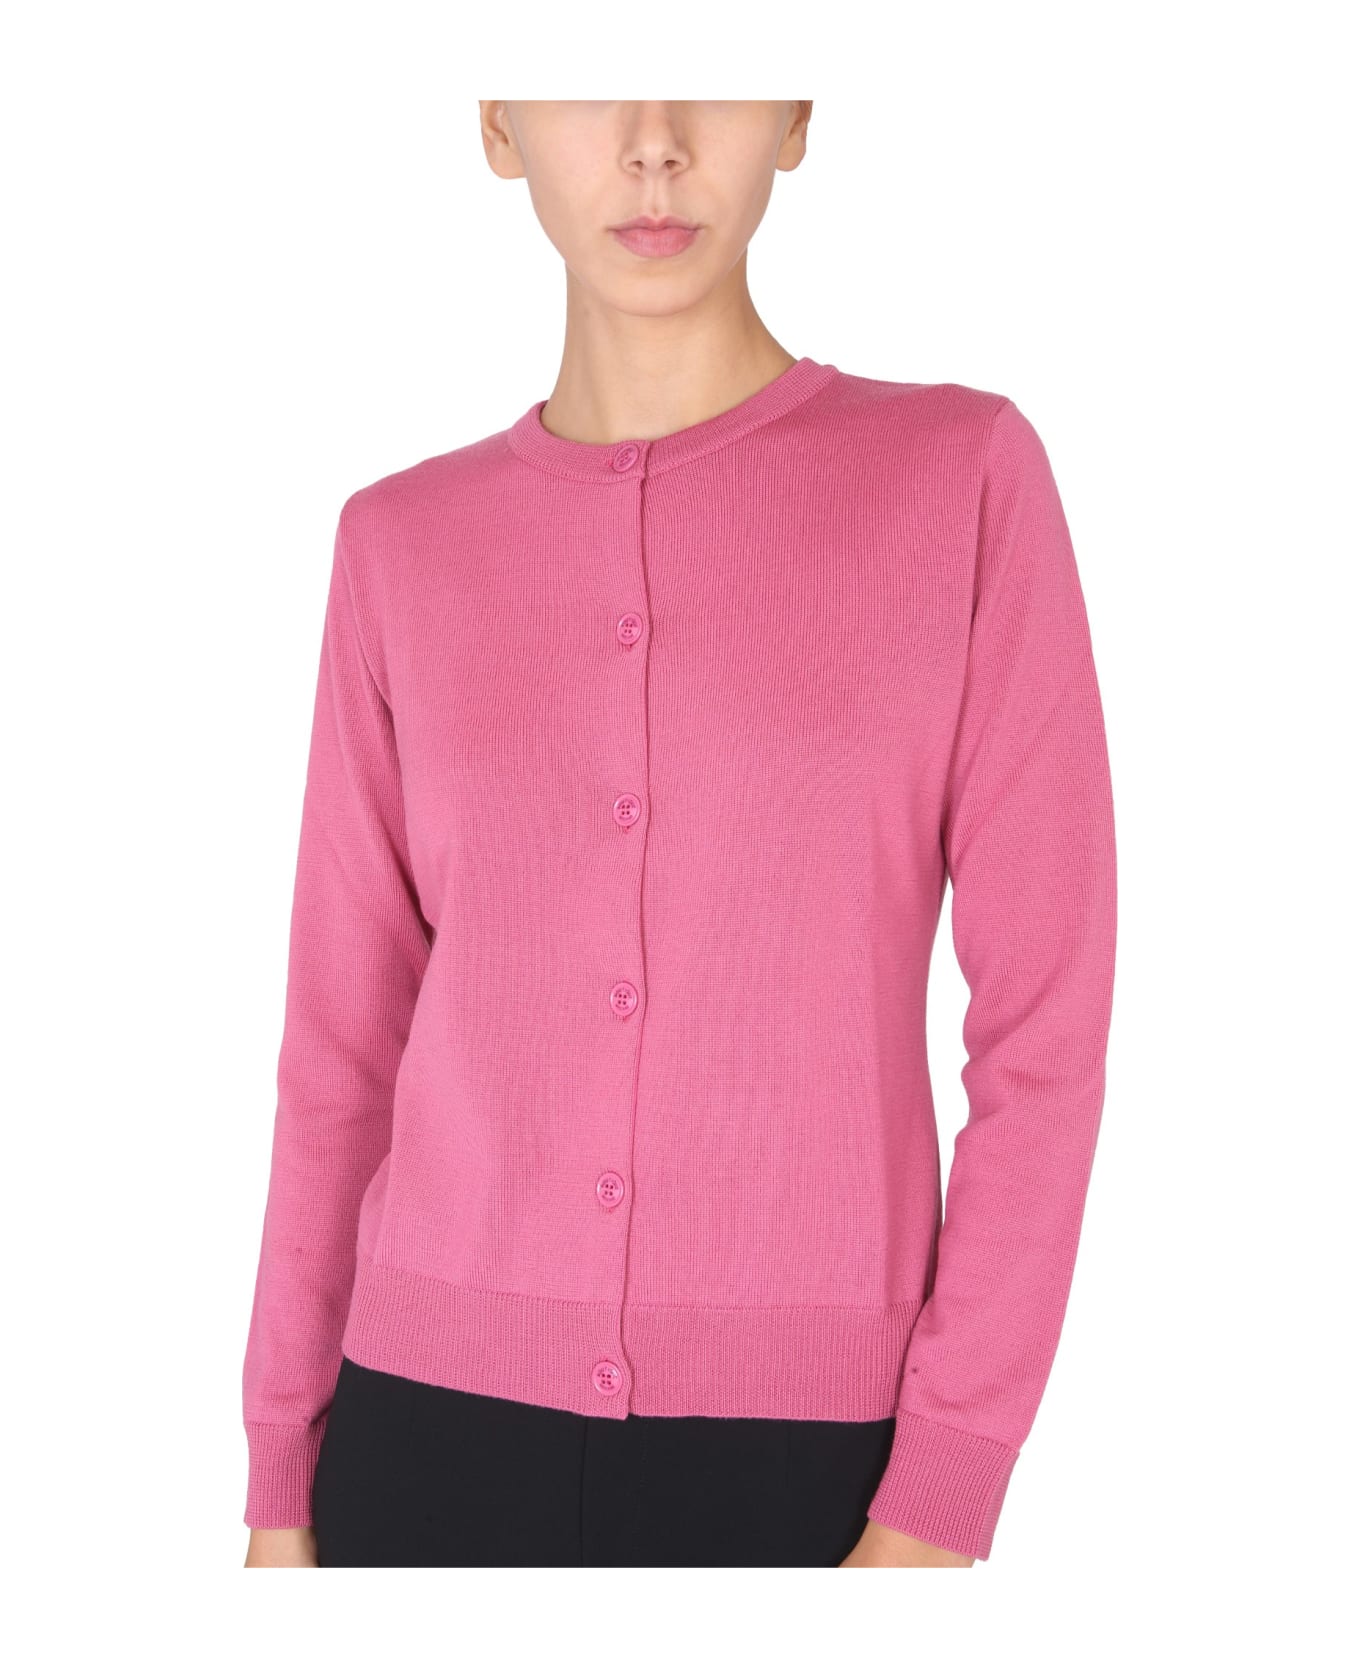 Boutique Moschino Wool Jersey. - ROSA